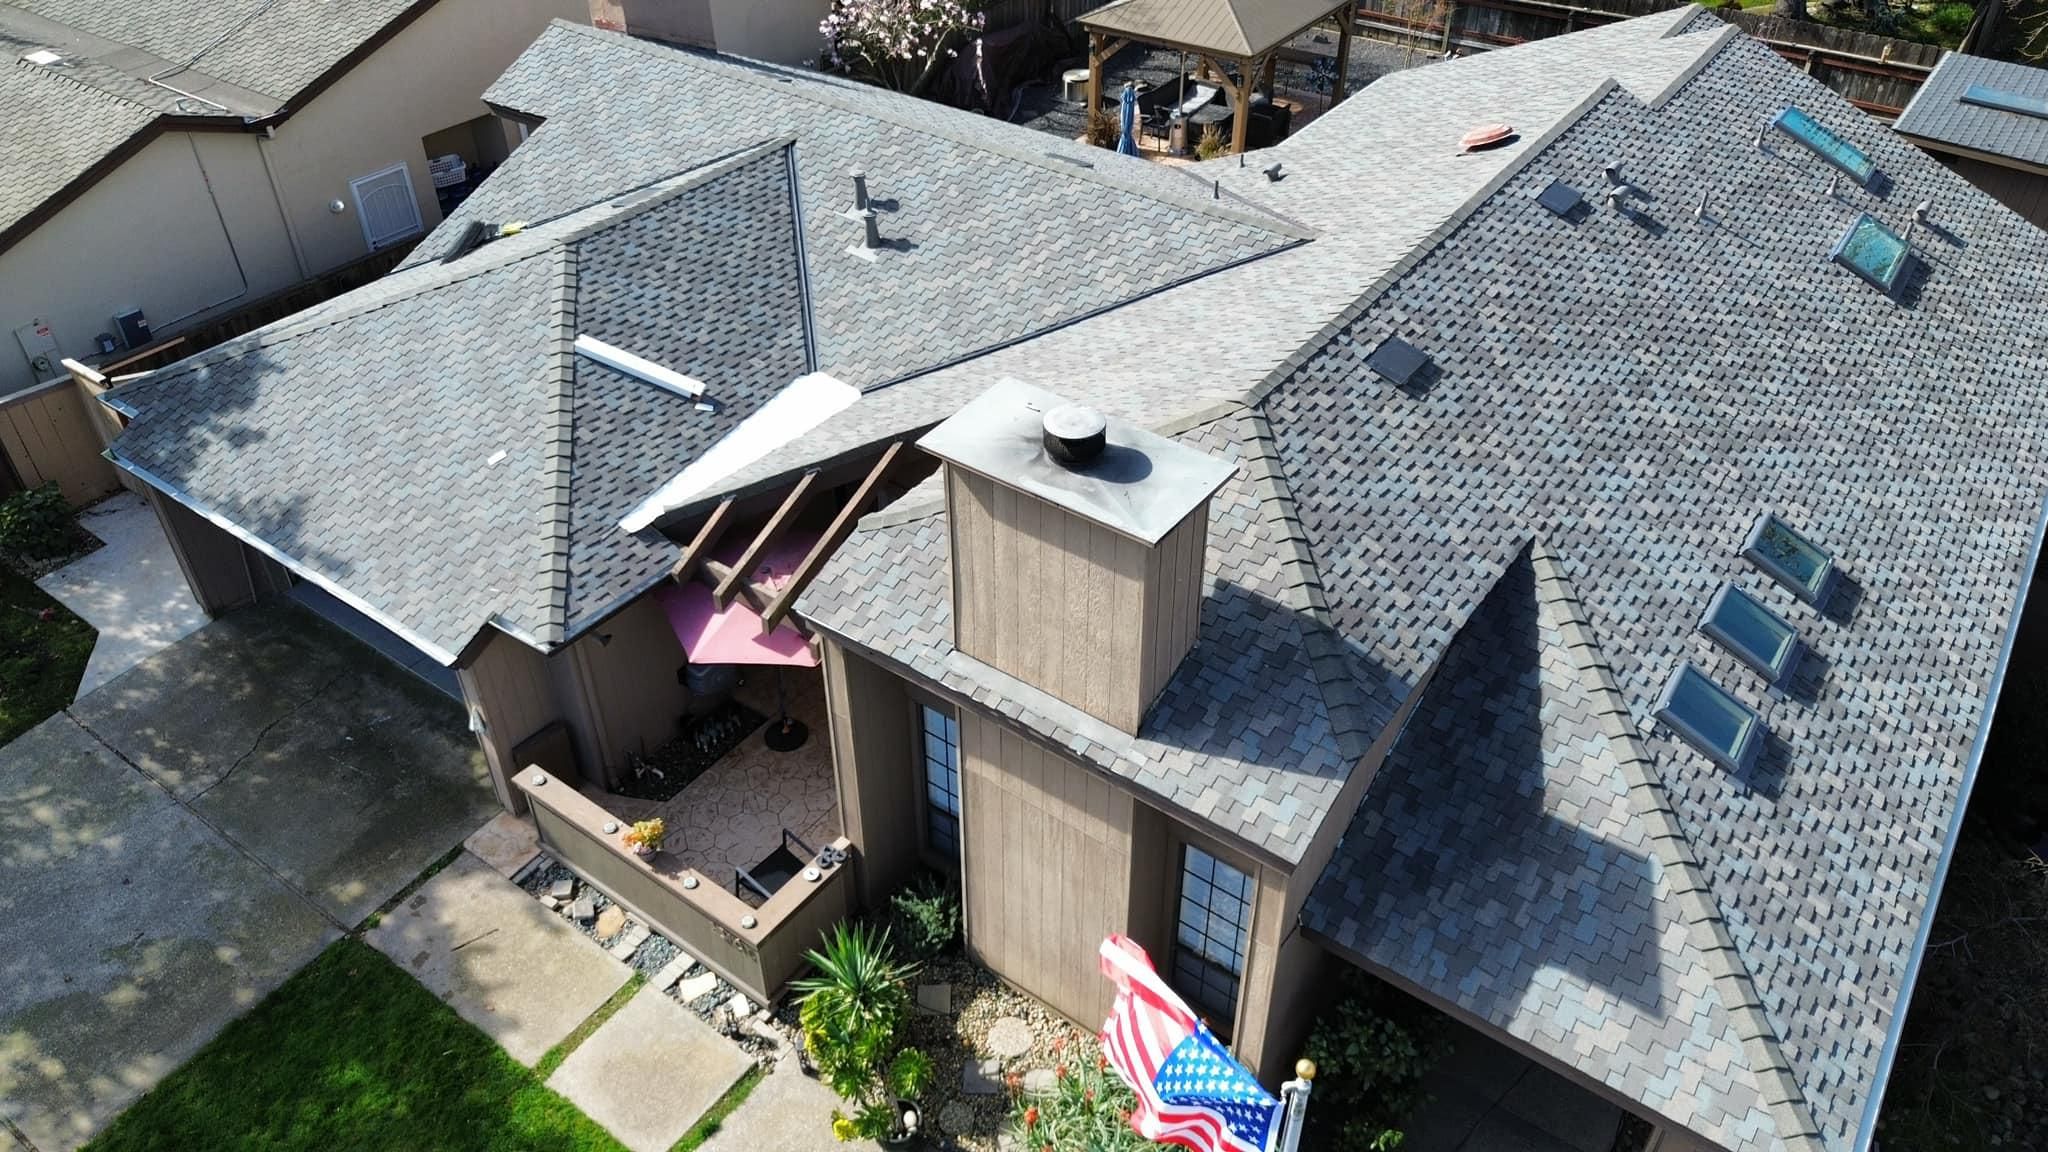 All Photos for Art’s Roofing in Stockton, CA